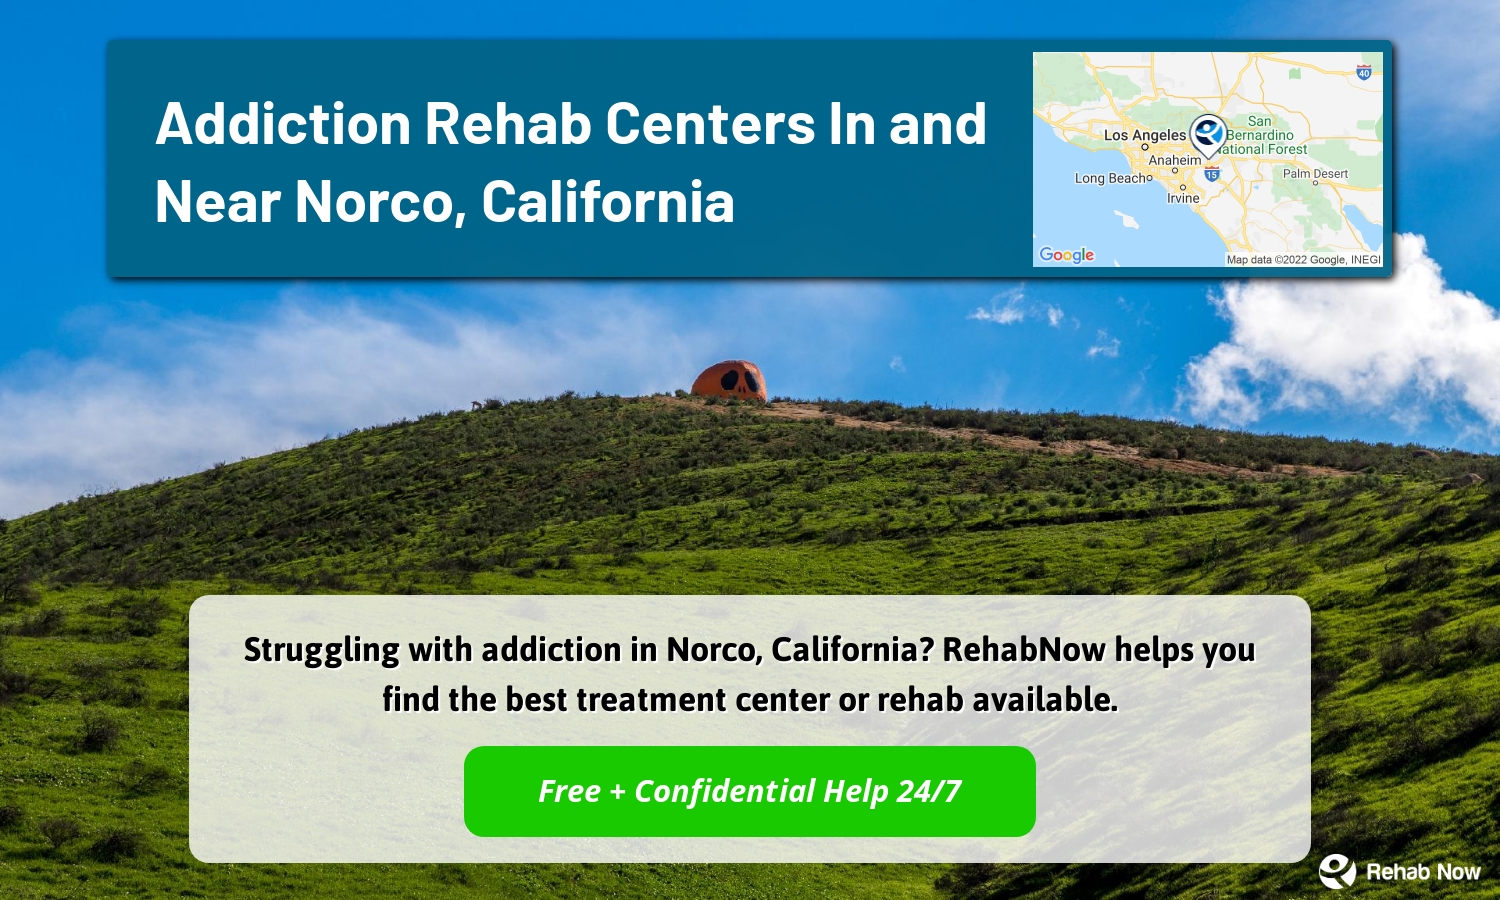 Struggling with addiction in Norco, California? RehabNow helps you find the best treatment center or rehab available.